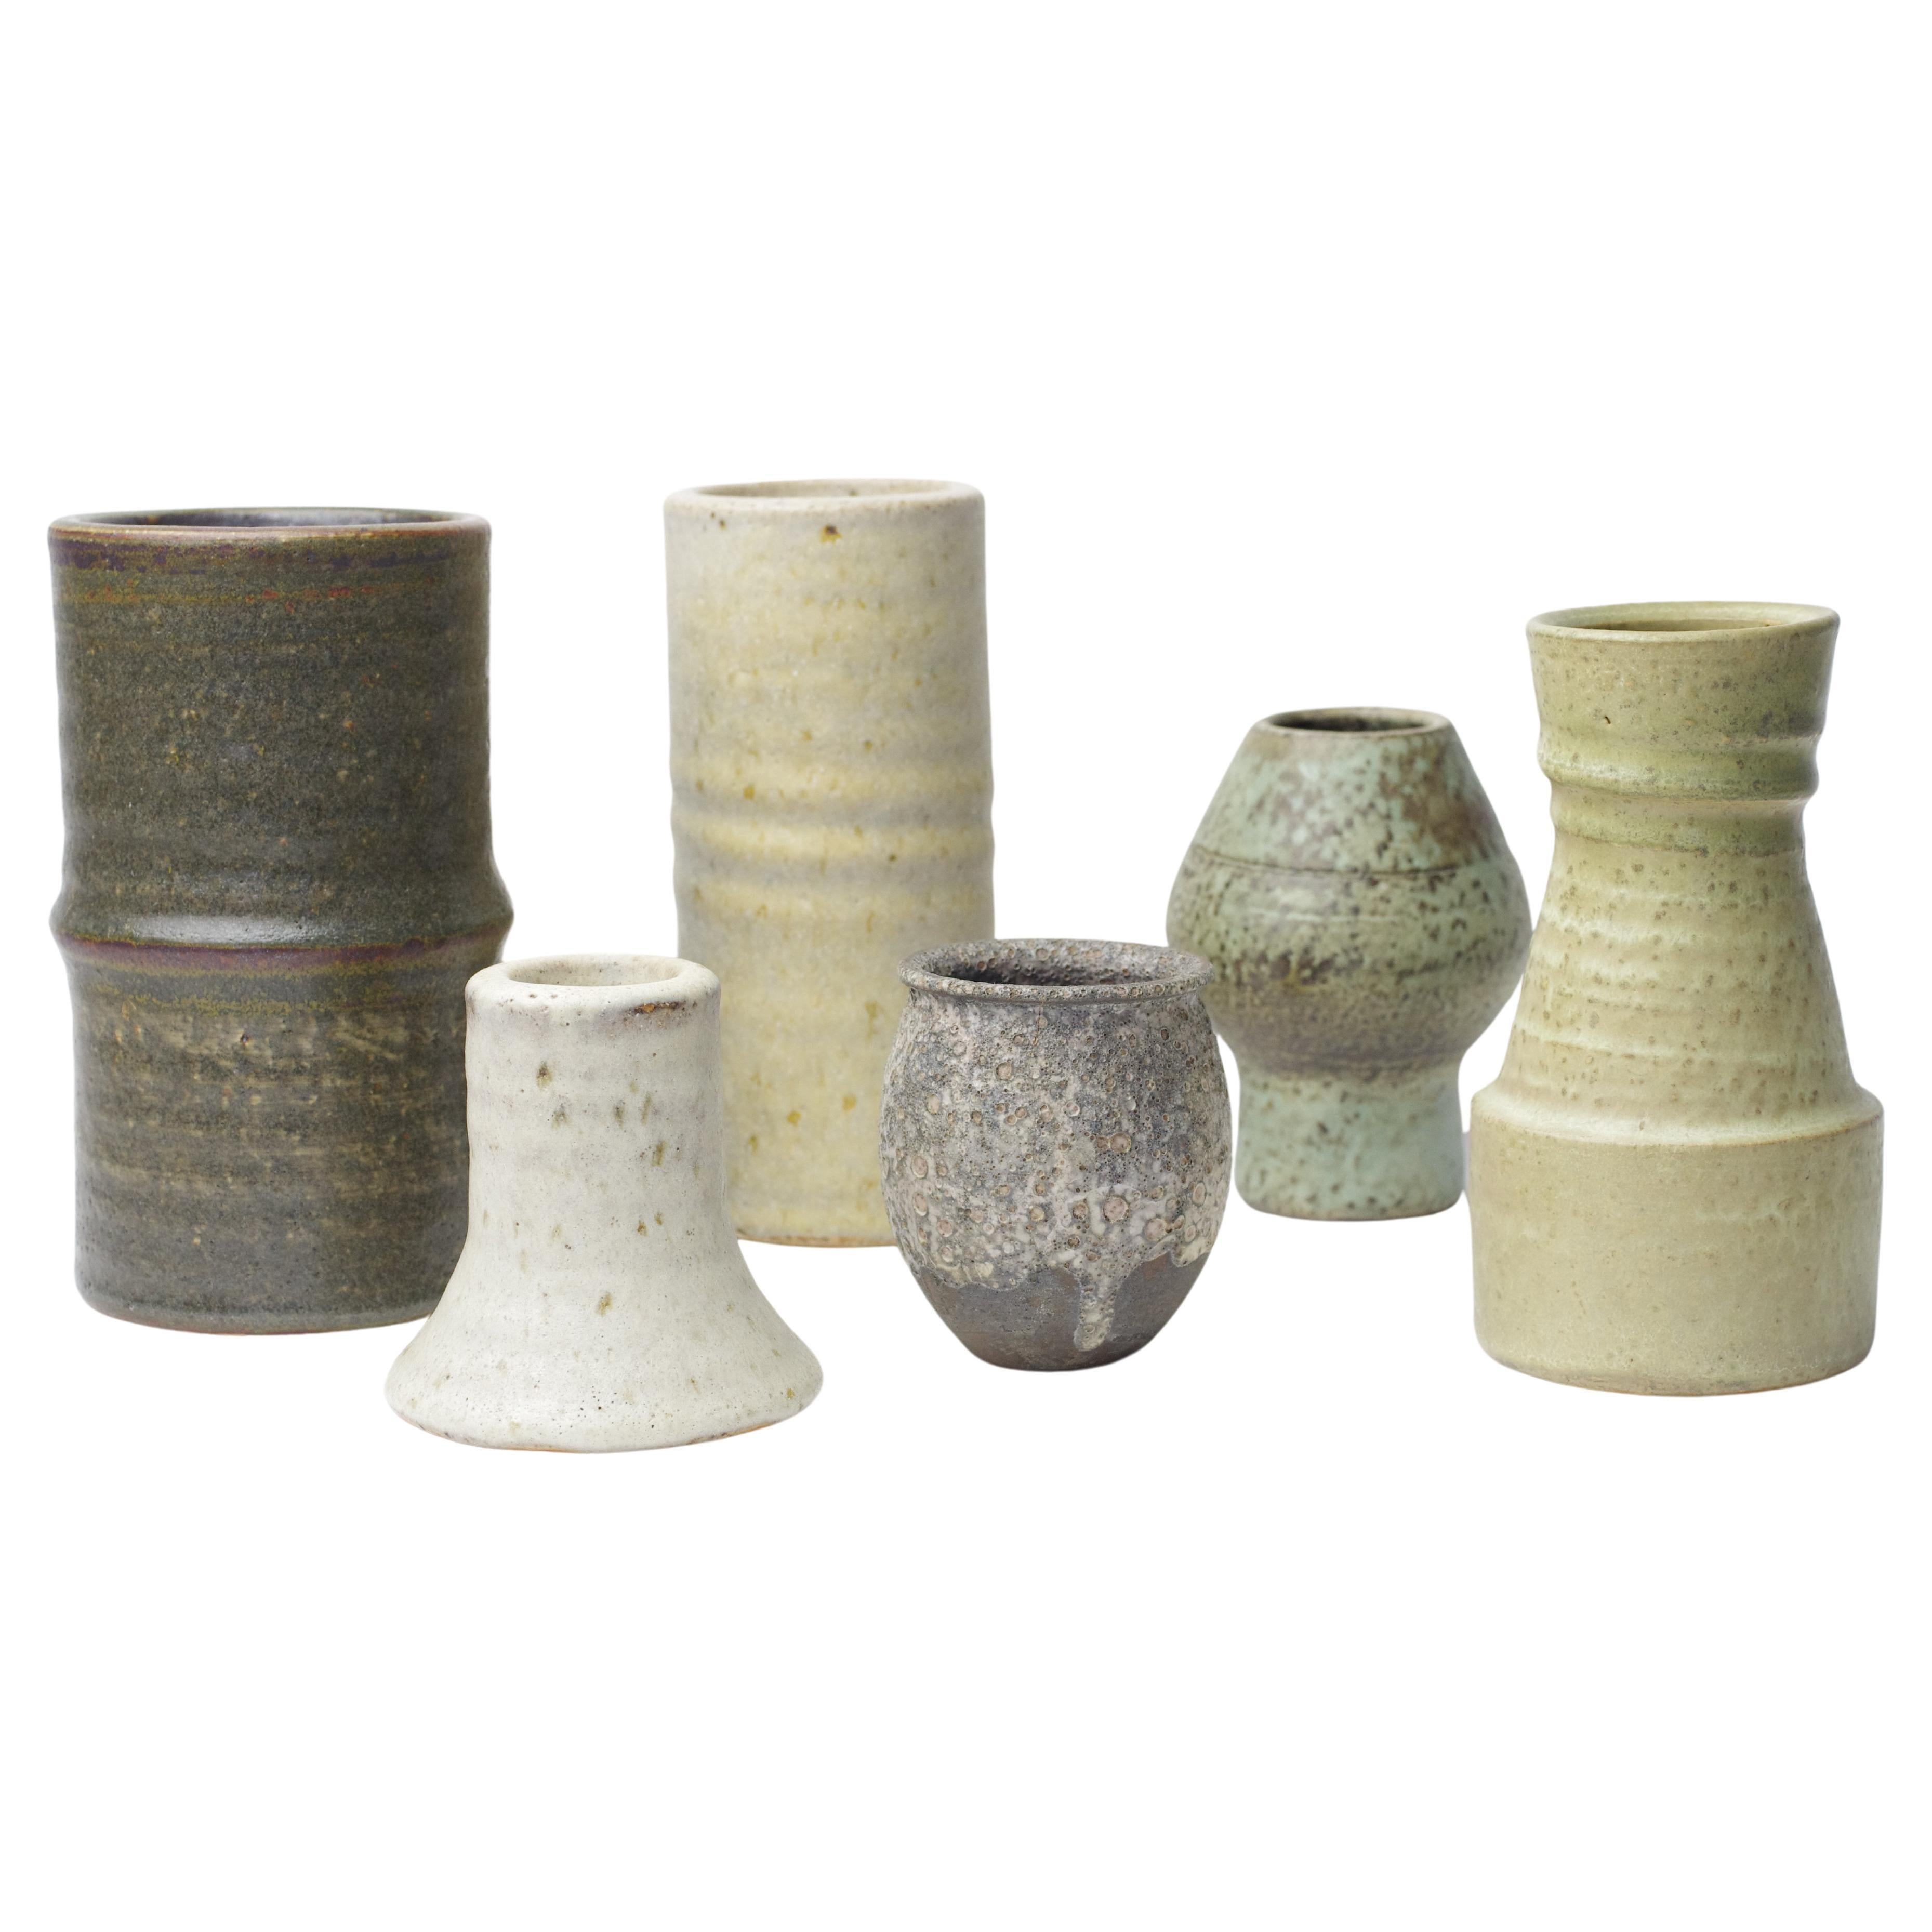 Mobach vases (6x) For Sale